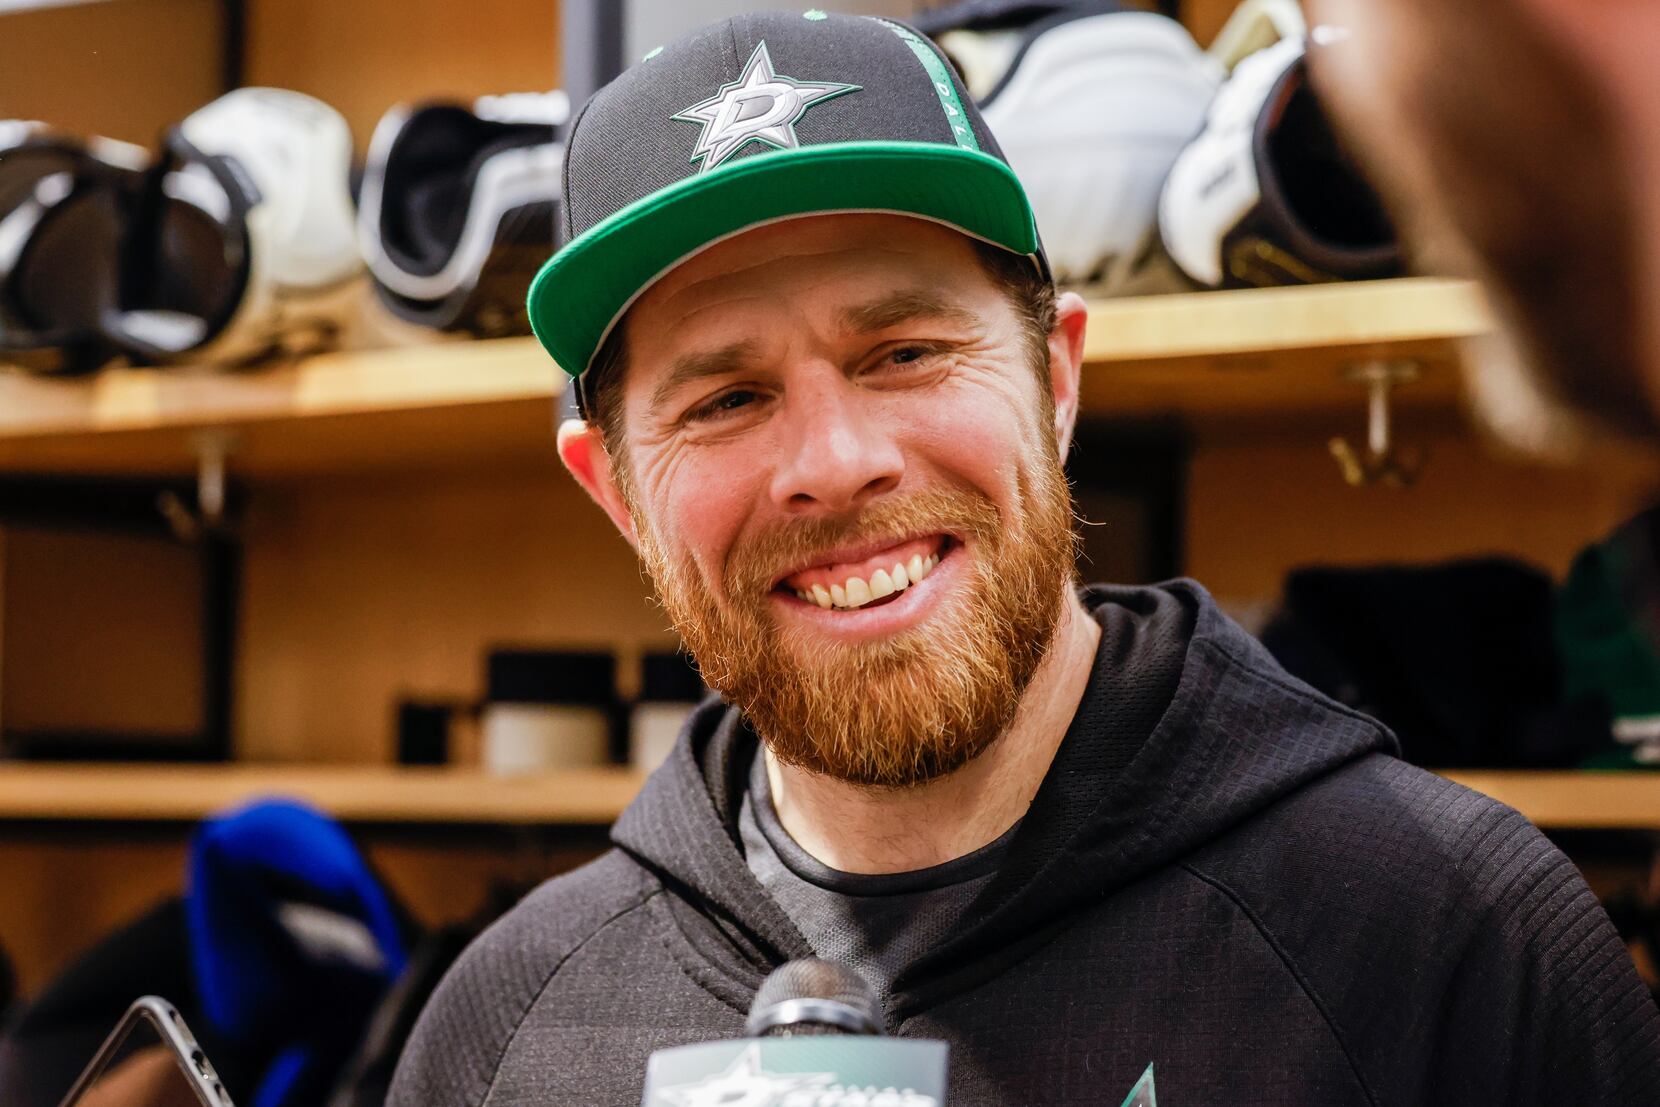 Joe Pavelski's extension with Stars is validation of team's